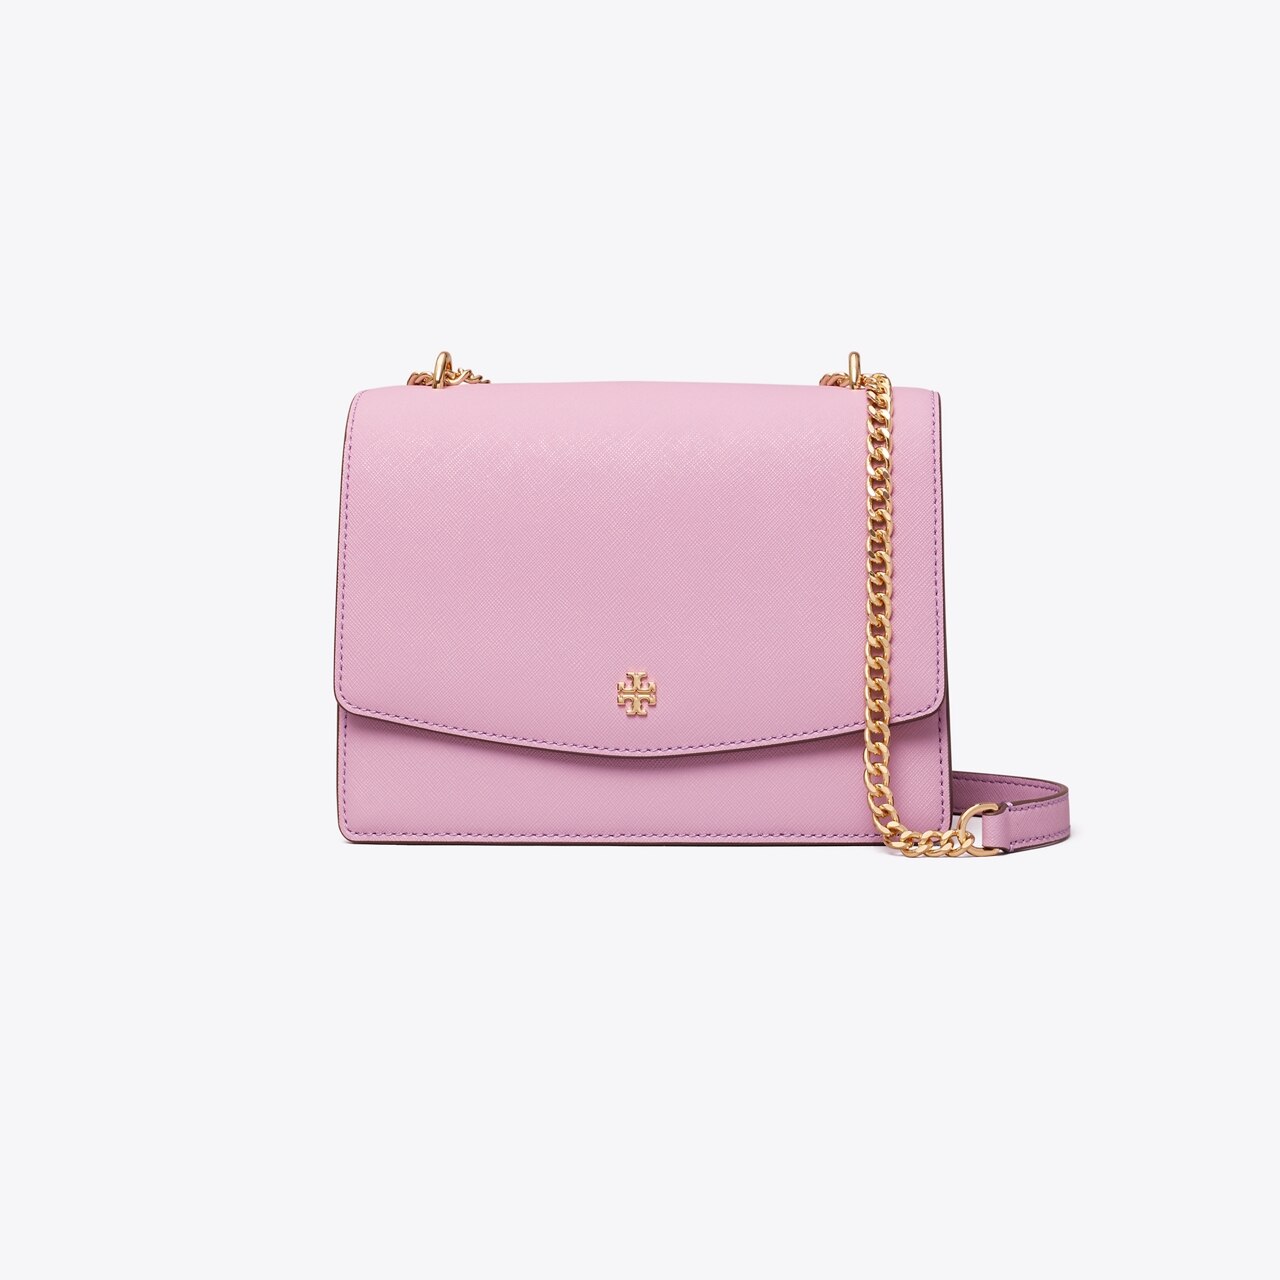 Tory Burch Saffiano Crossbody Outlet Shoulder Bags (78604)